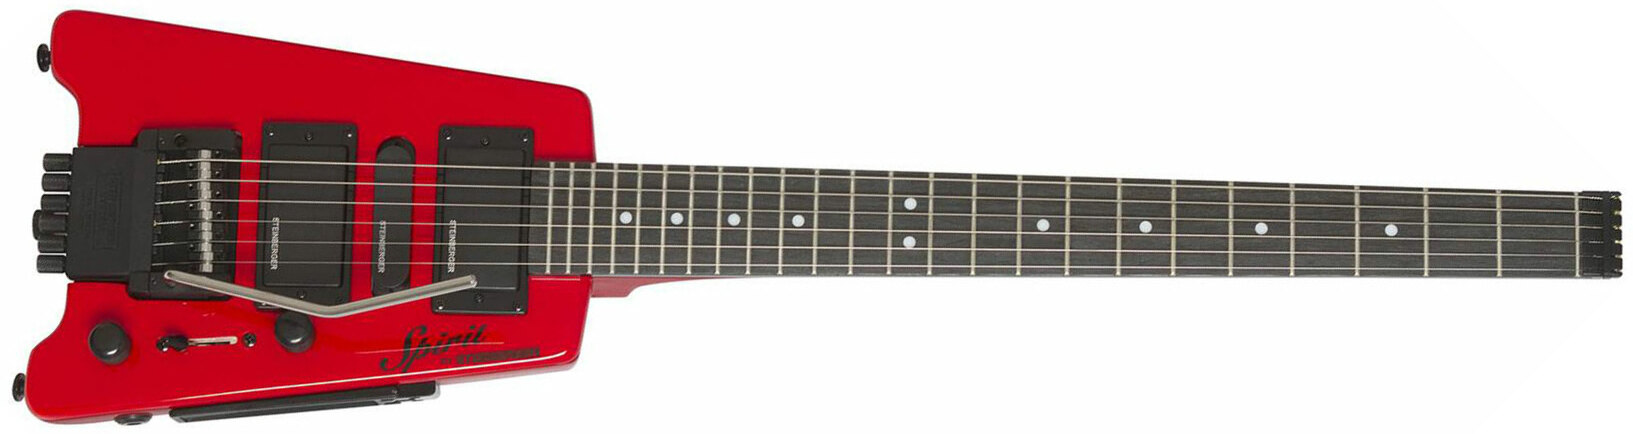 Steinberger Gt-pro Deluxe Outfit Hsh Trem Rw +housse - Hot Rod Red - Elektrische Reisegitarre - Main picture